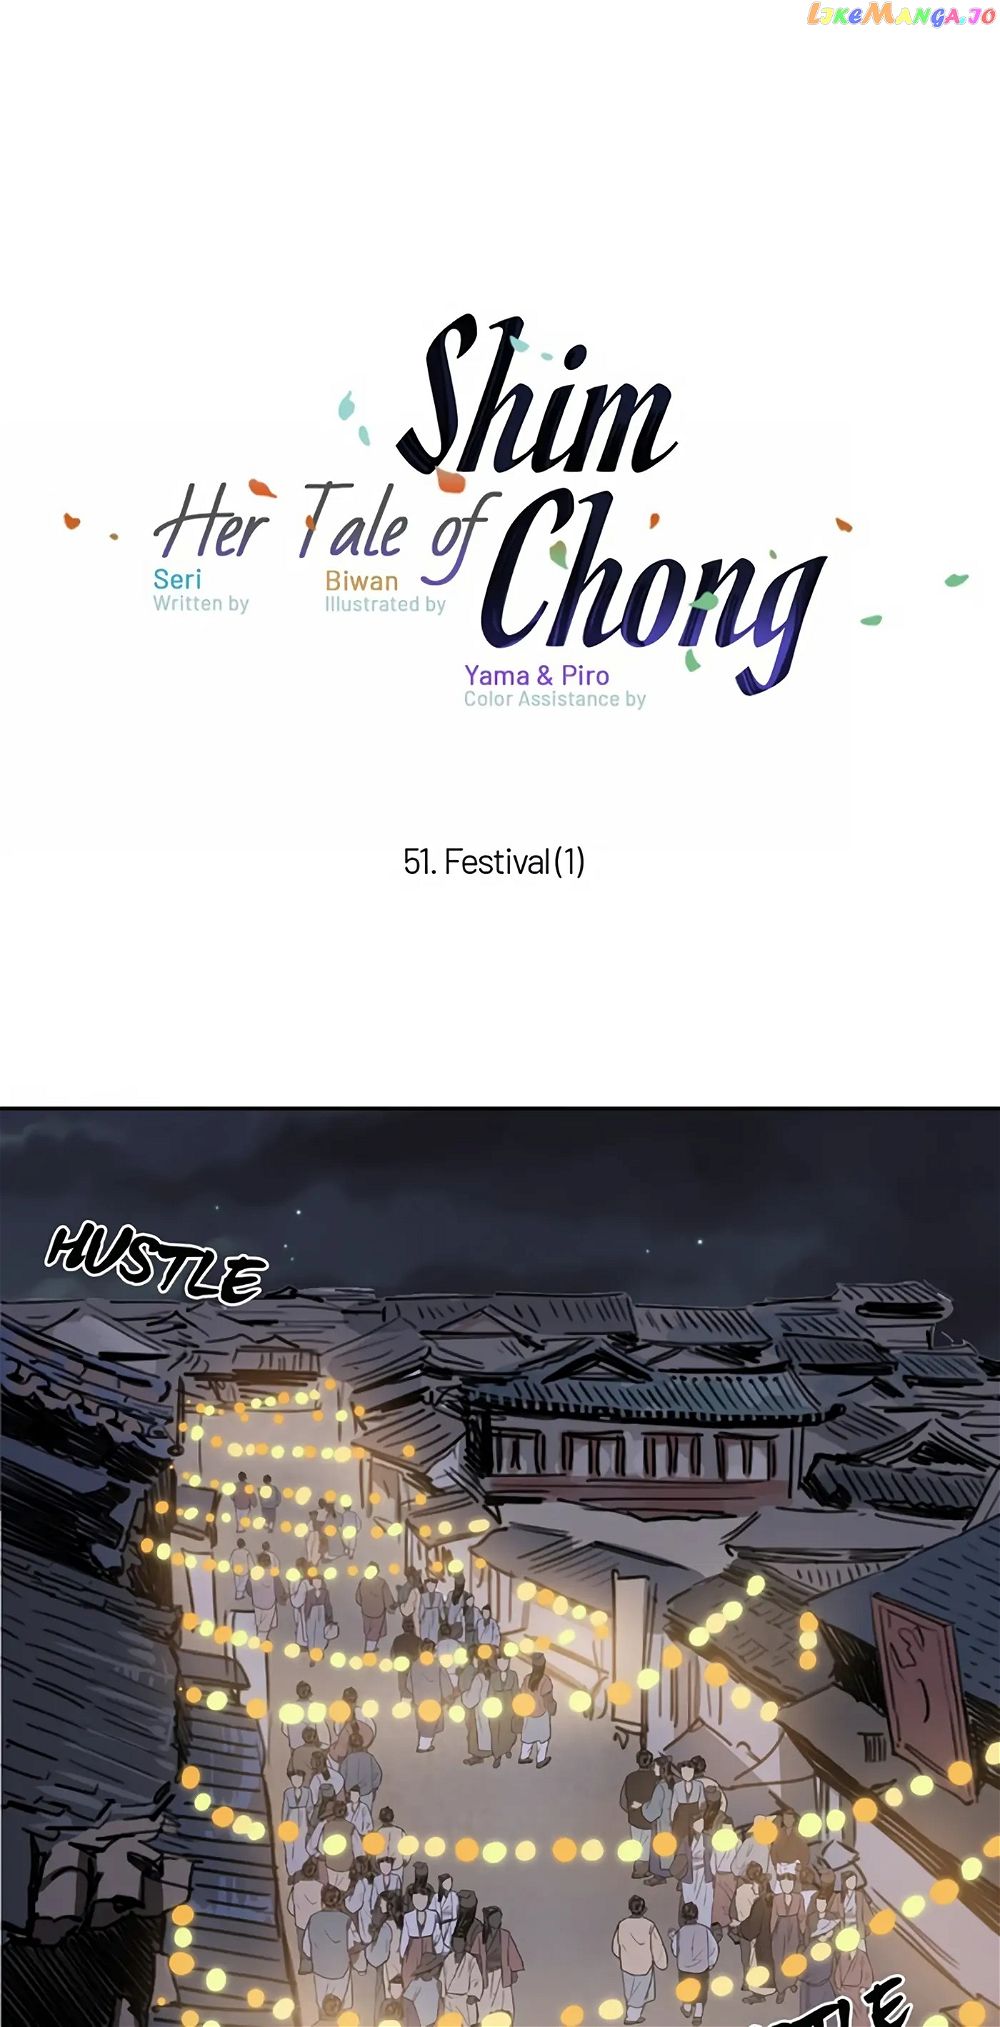 Her Tale of Shim Chong Chapter 51 - Page 1